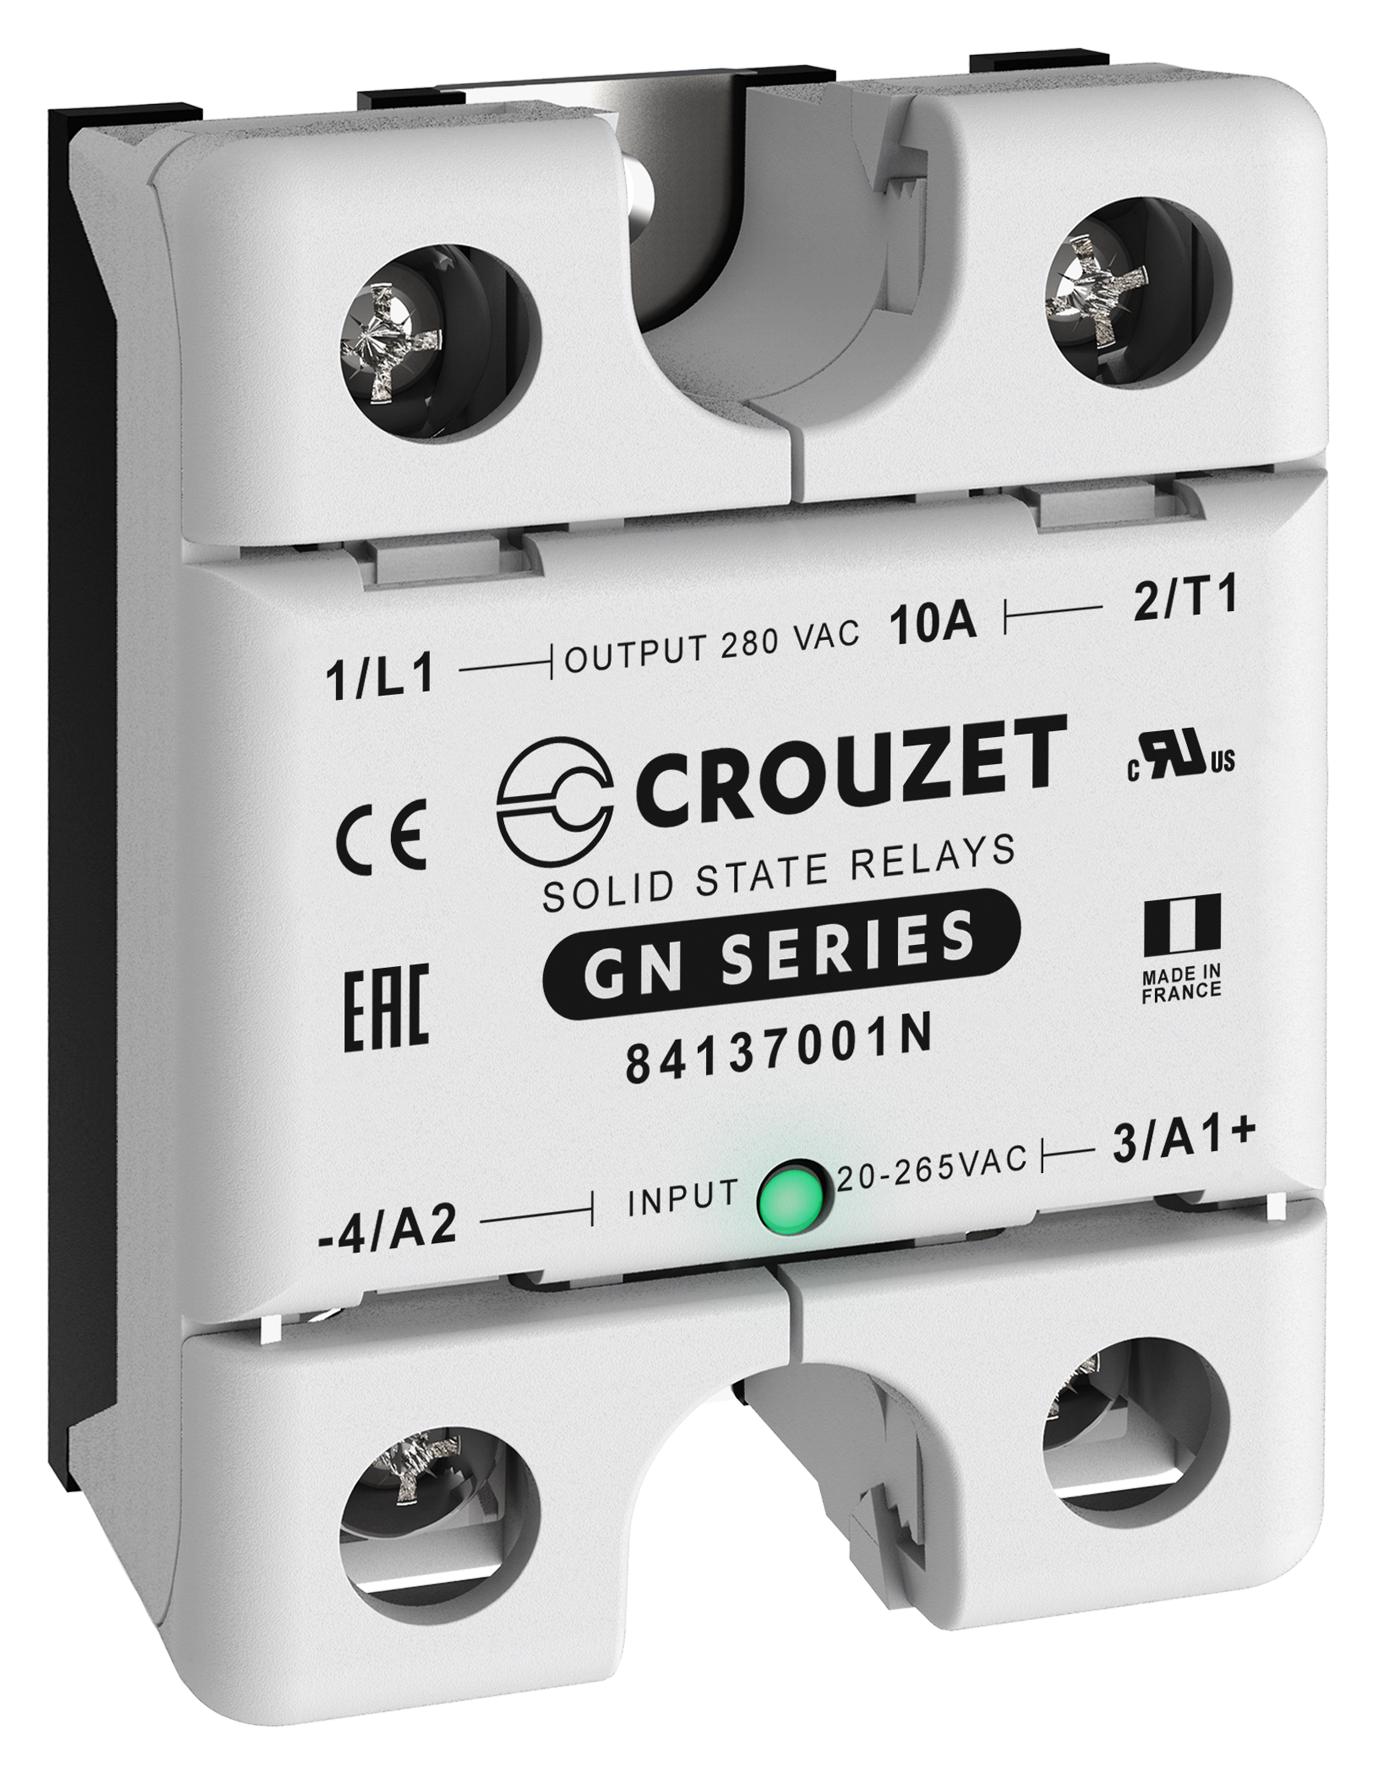 84137001N SOLID STATE RELAY, 10A, 24-280VAC, PANEL CROUZET